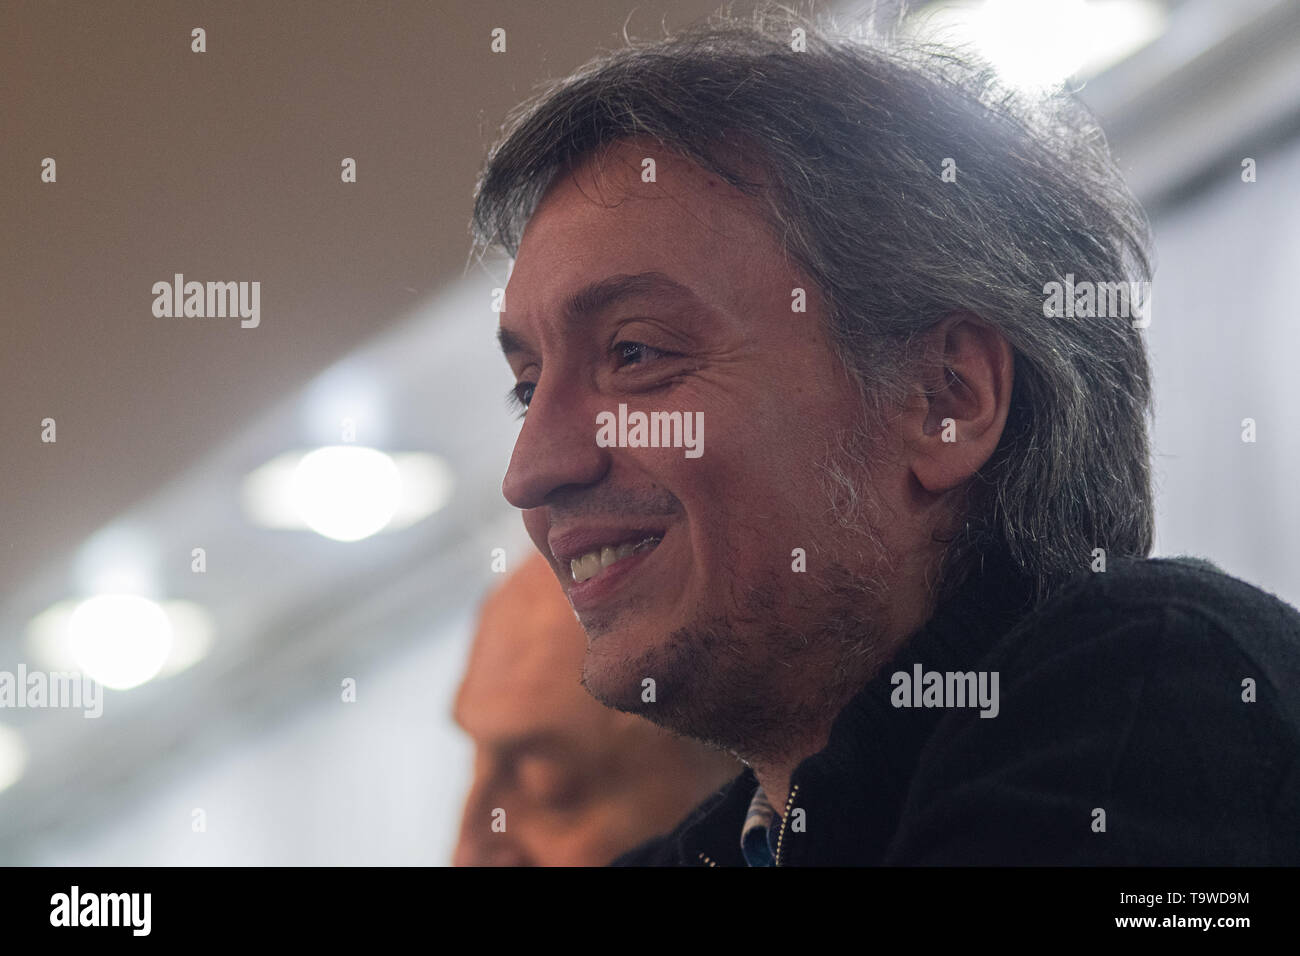 Buenos Aires, Buenos Aires, Argentina. 20th May, 2019. Congressman MAXIMO KIRCHNER, son to President CRISTINA FERNANDEZ DE KIRCHNER and late President NESTOR KIRCHNER, is seen during a conference along Partido Solidario (Solidary Party) leader CARLOS HELLER. The conference, titled ''Another Country is Possible'', presented ideas to get the country out of the economic crisis in a scenario in which the Kirchnerism returns to Office after the upcoming general elections. Credit: Patricio Murphy/ZUMA Wire/Alamy Live News Stock Photo